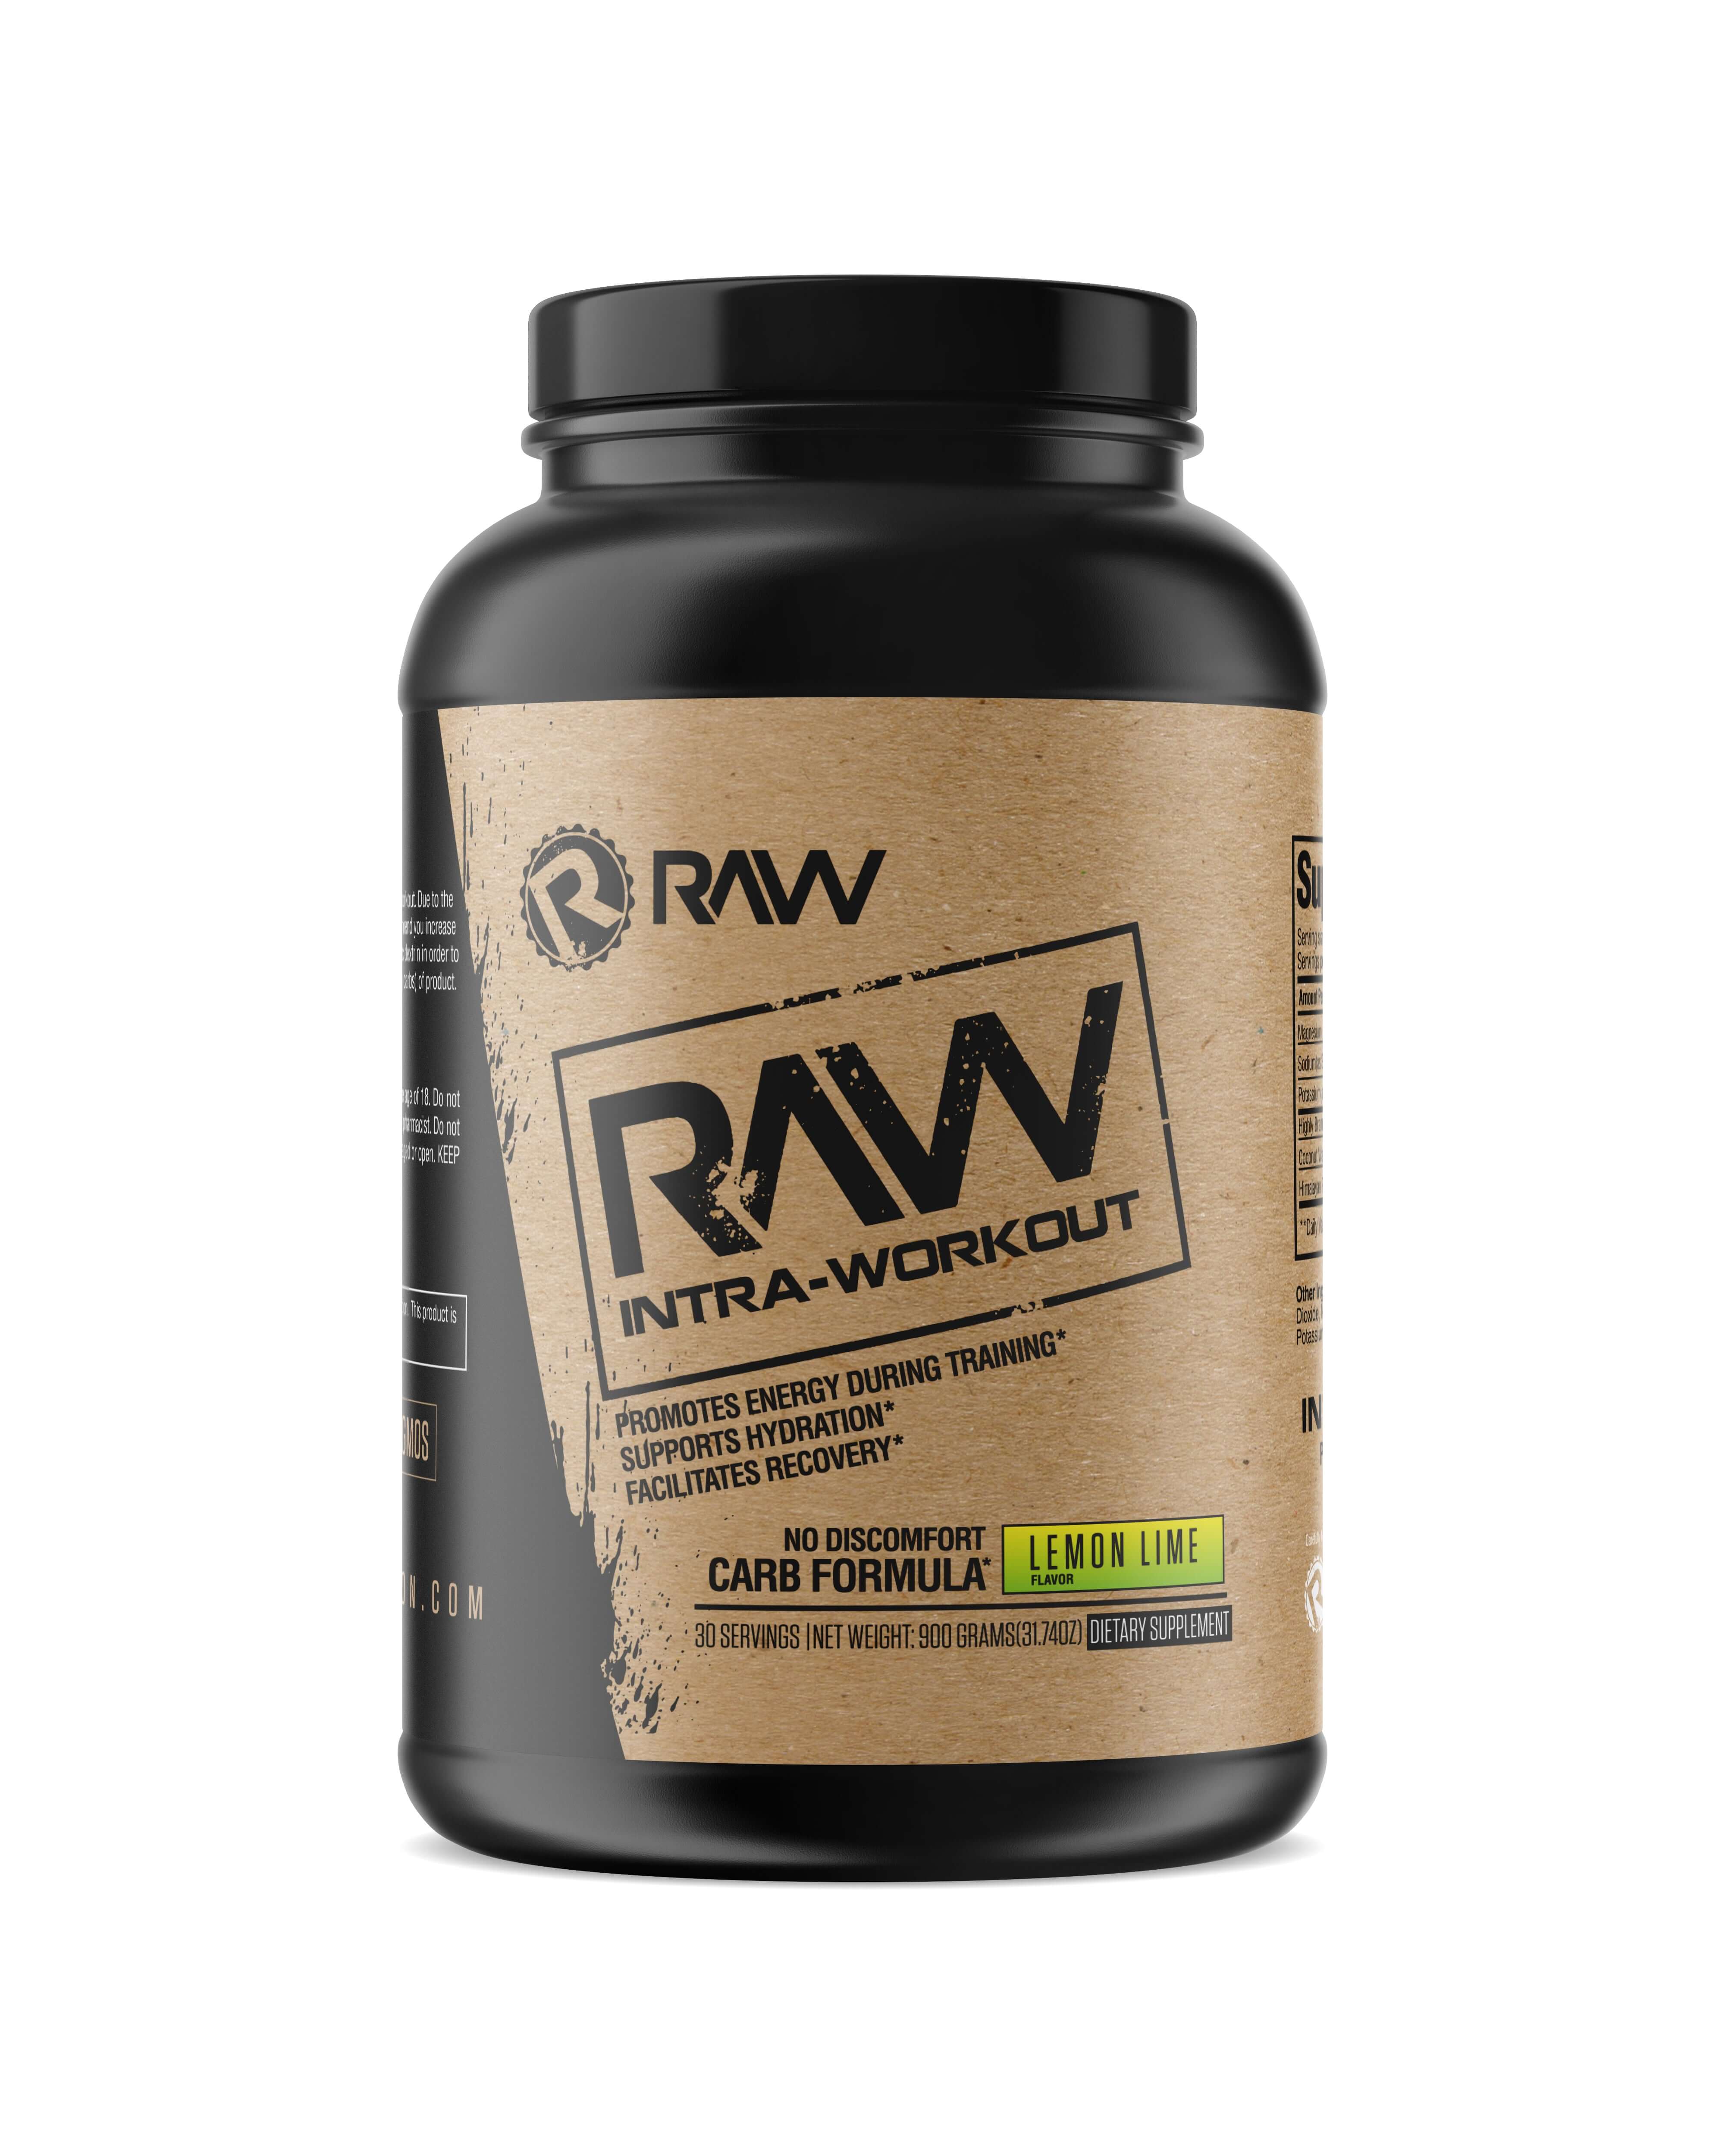 RAW NUTRITION RAW INTRA-WORKOUT front shadow